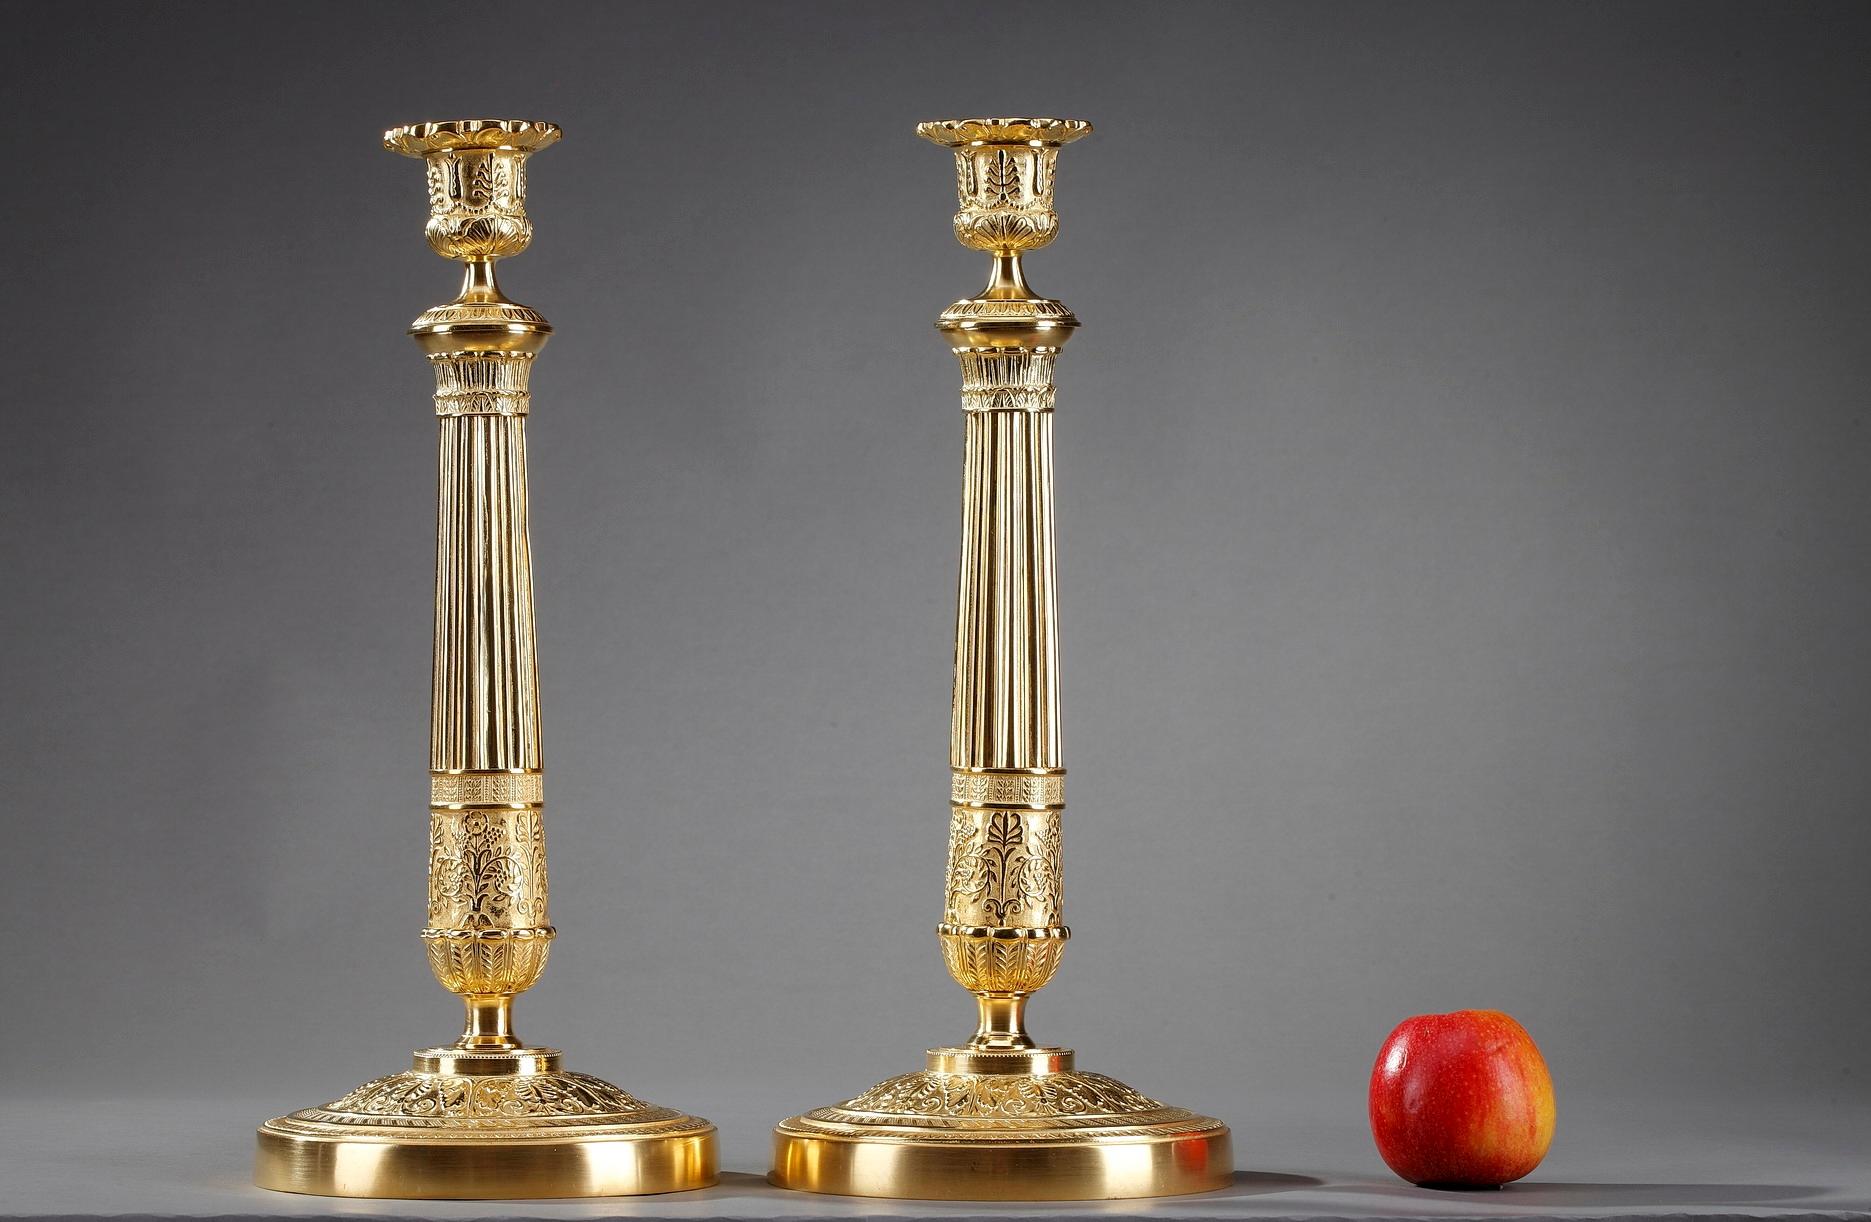 Large French restauration ormolu candlesticks. Crafted of gilt bronze, the pair feature a finely chiseled scrolling foliage and acanthus leaf motif. The sockets are embellished with palmette and floral motif. The fluted stems are supported by a